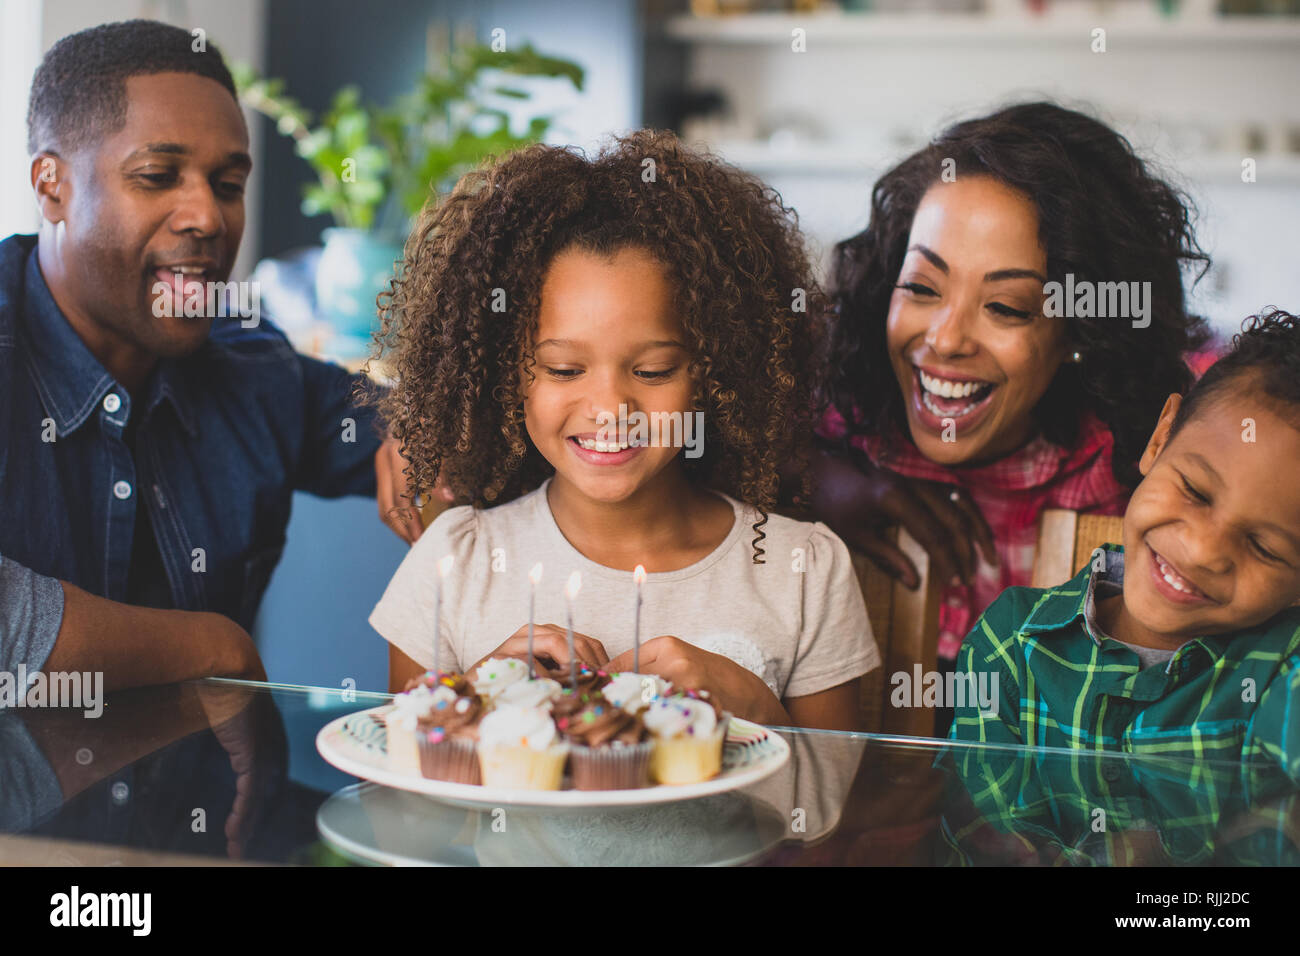 African American family celebrating a birthday Banque D'Images